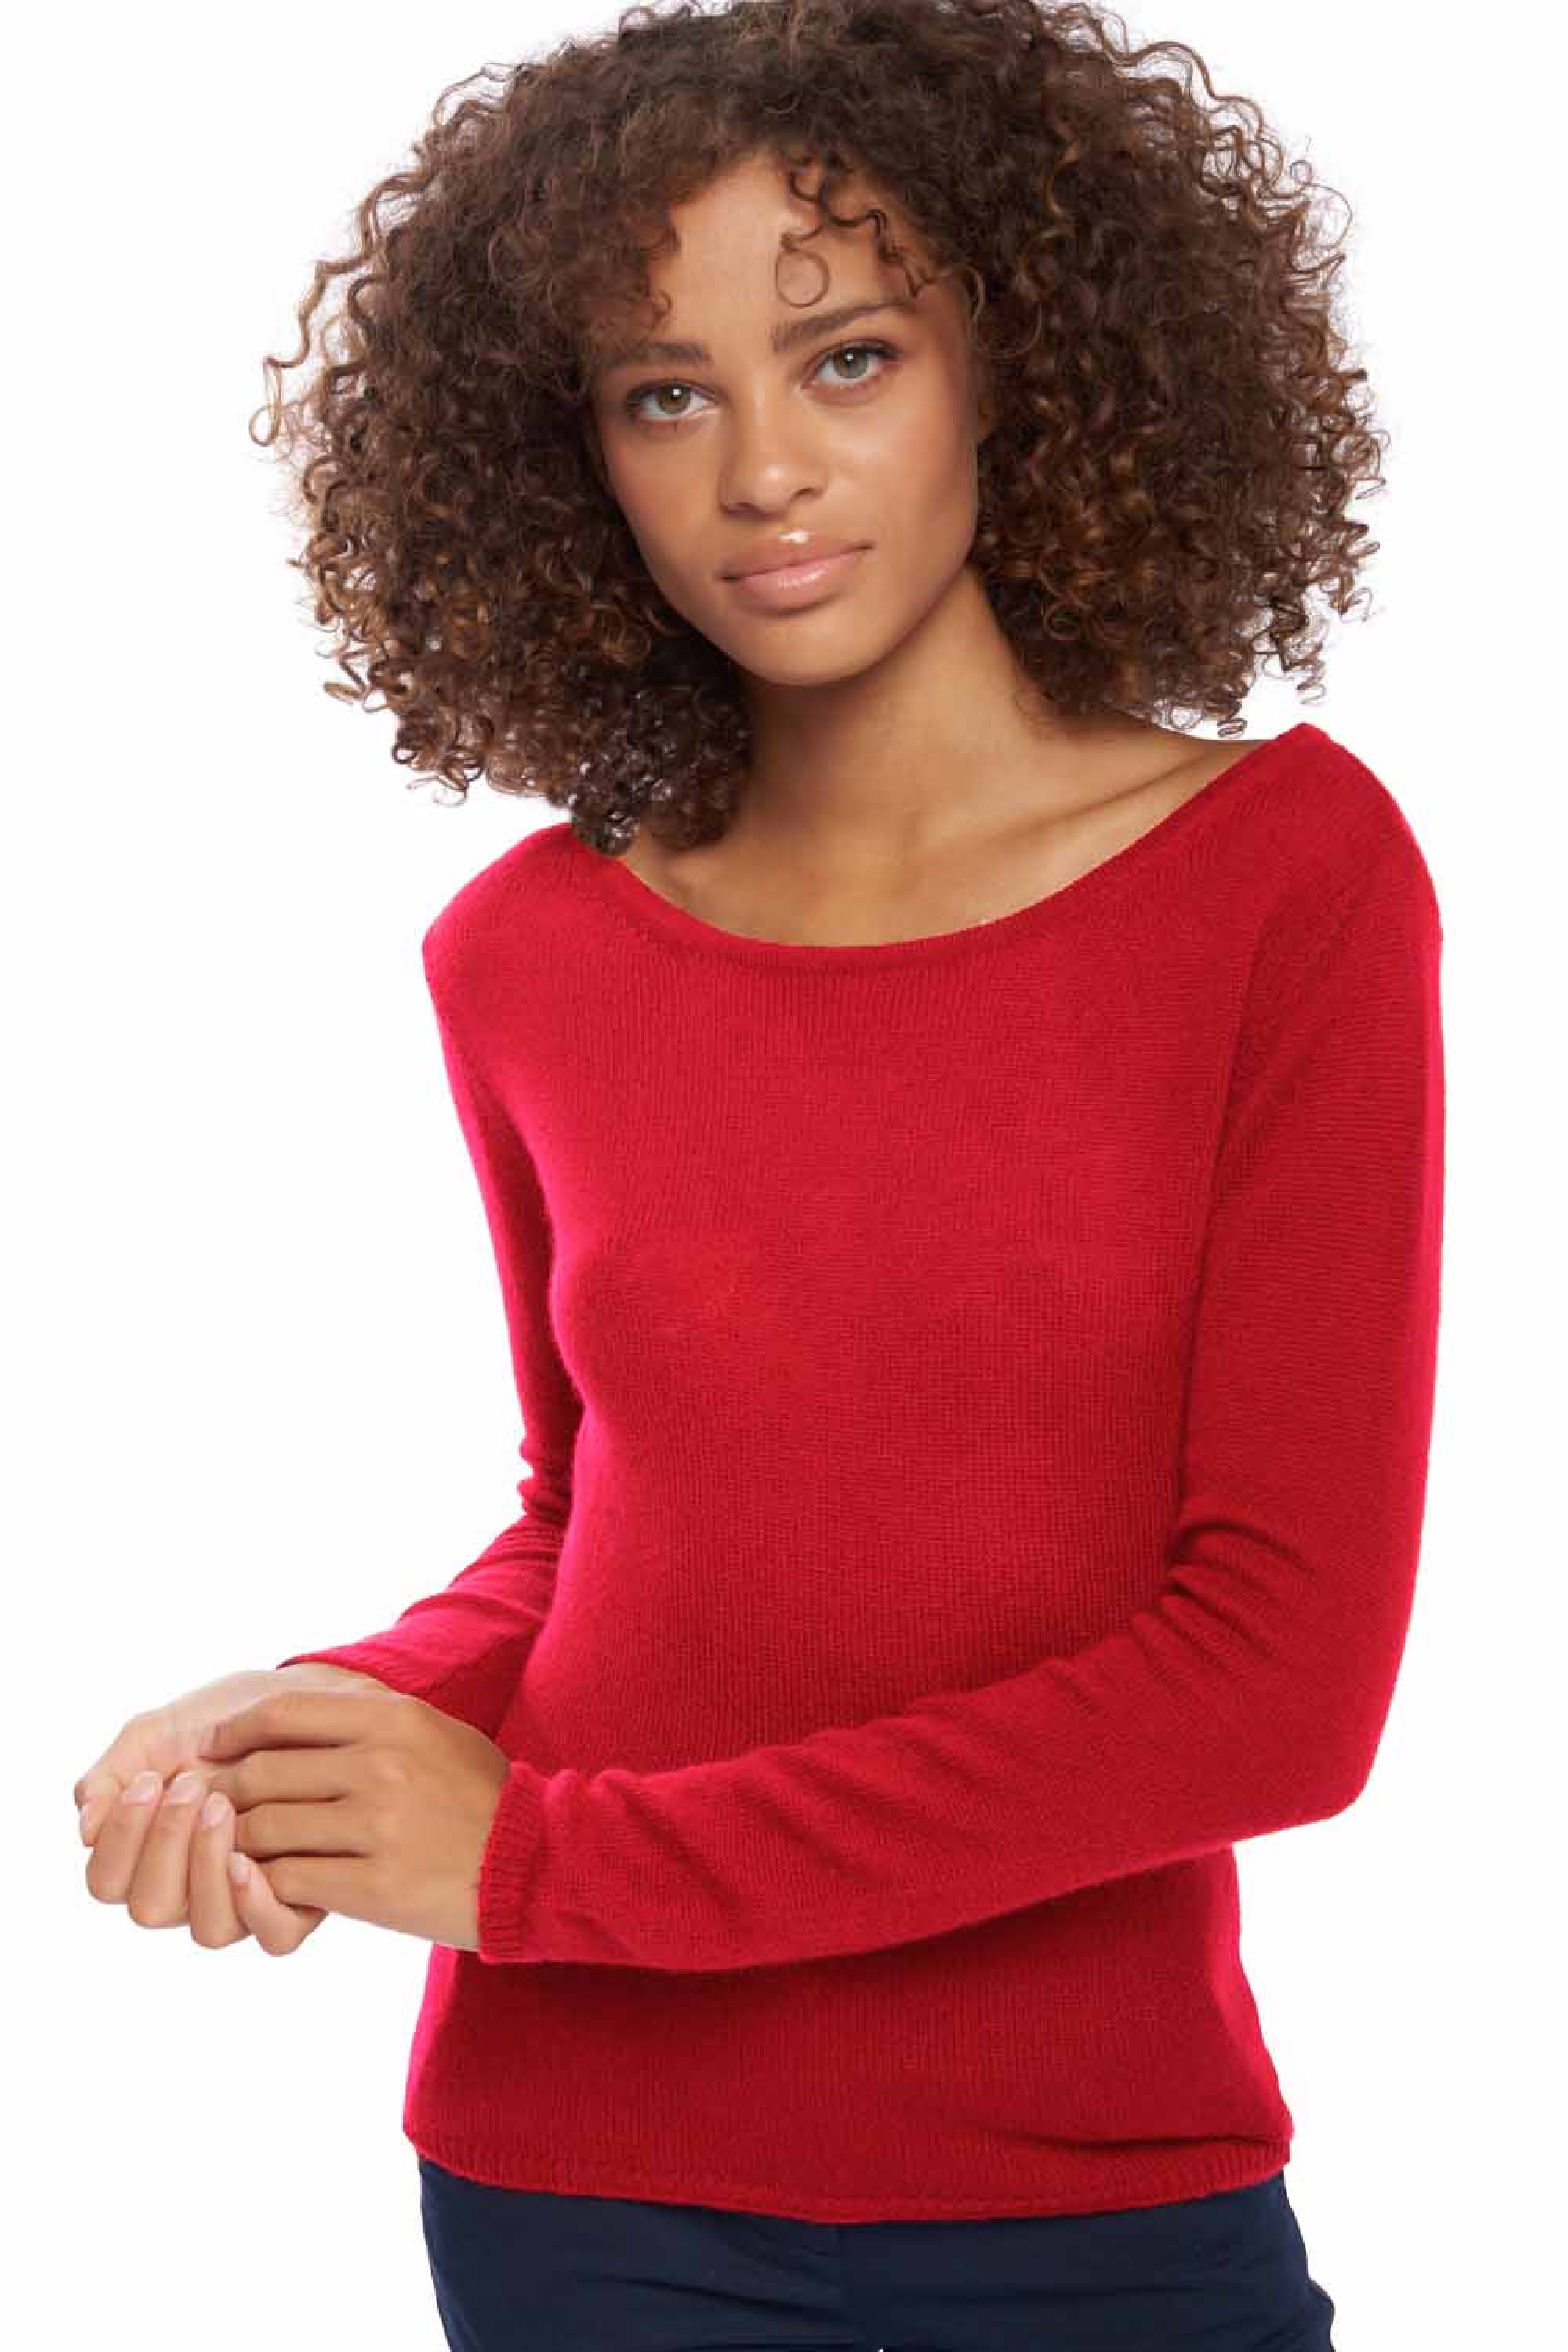 Cashmere ladies basic sweaters at low prices caleen blood red xl